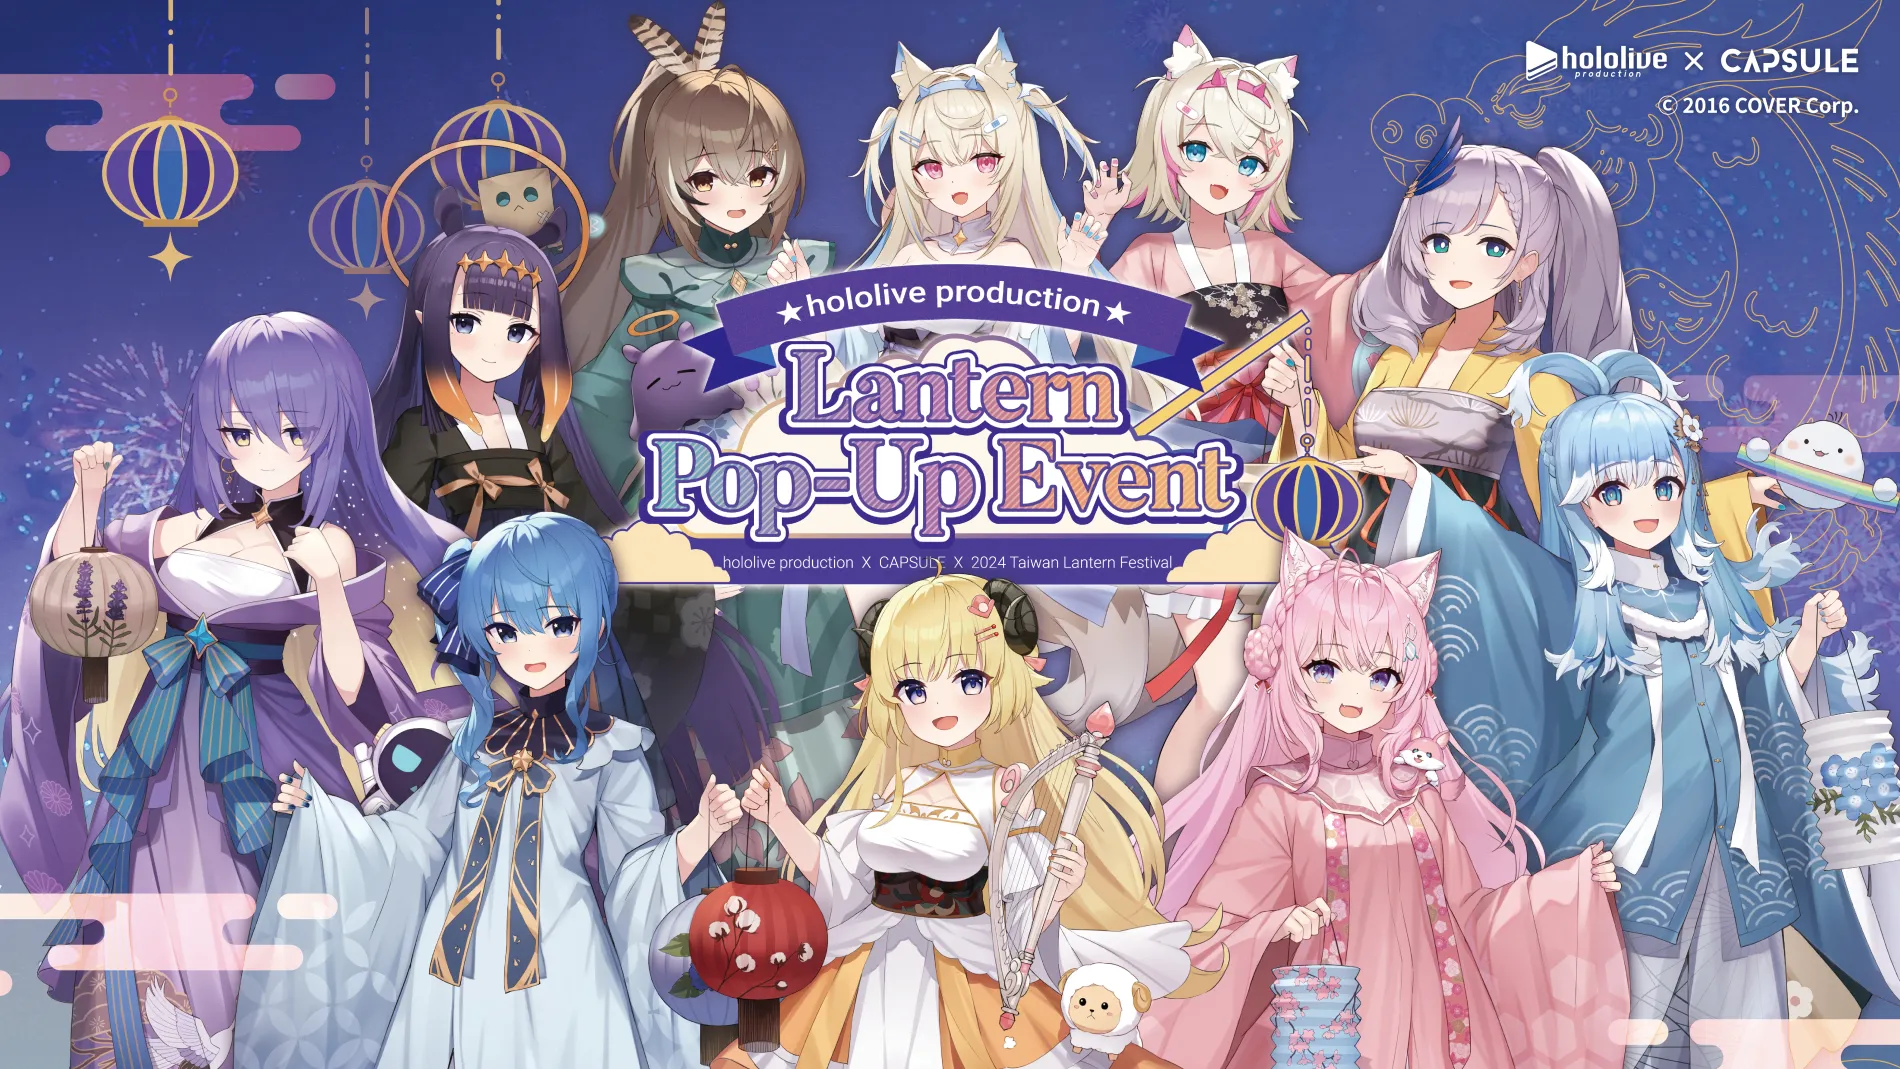 hololive production x CAPSULE POP-UP STORE in 2024 Taiwan Lantern Festival from February 24th